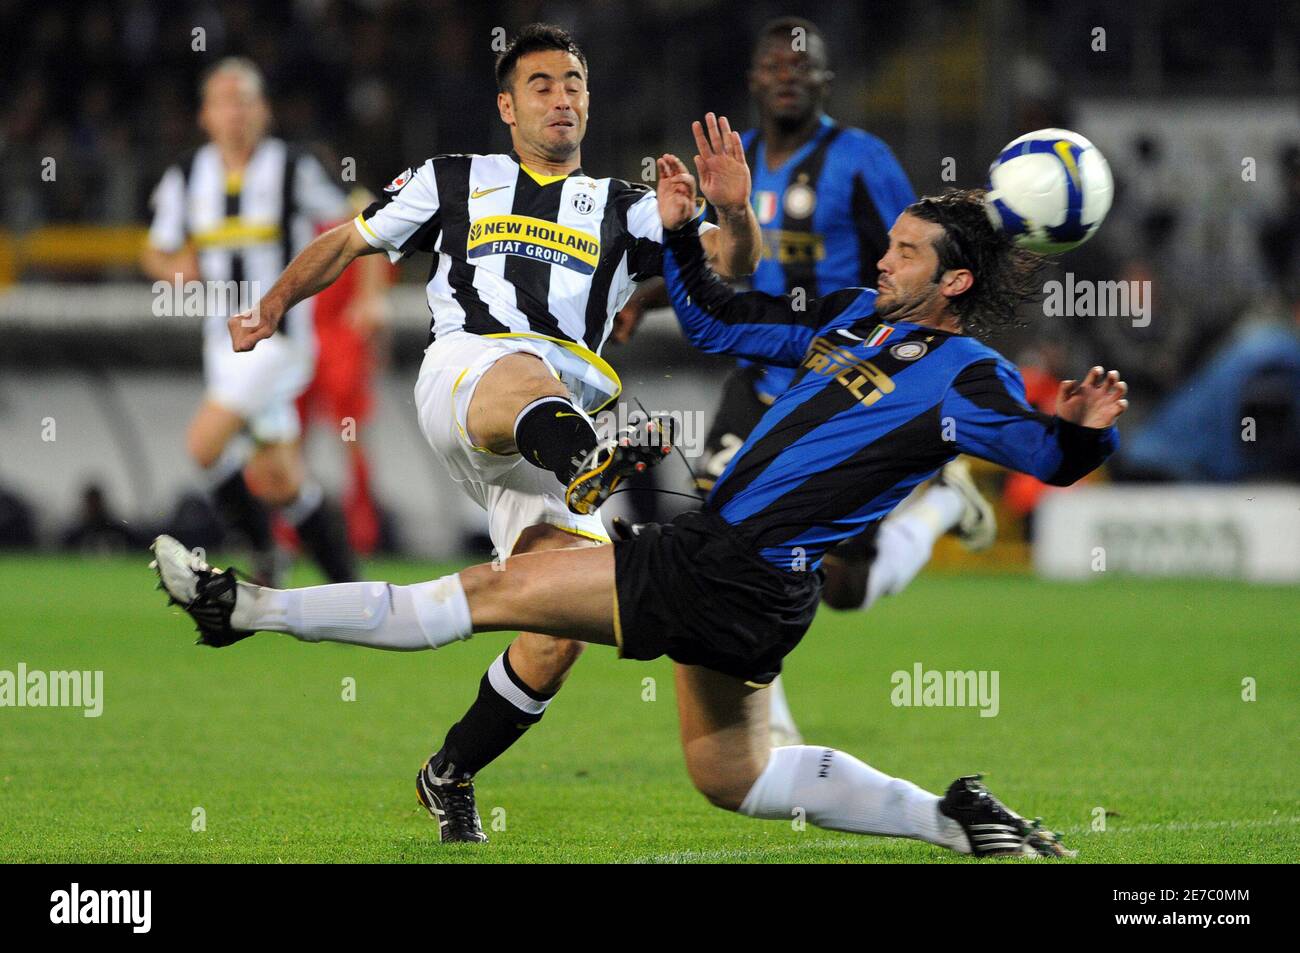 Juventus' Marco Marchionni (L) challenges Christian Chivu of Inter Milan during their Serie A soccer match at the Olympic stadium in Turin April 18, 2009. REUTERSAlessandro Bianchi   (ITALY SPORT SOCCER) Stock Photo